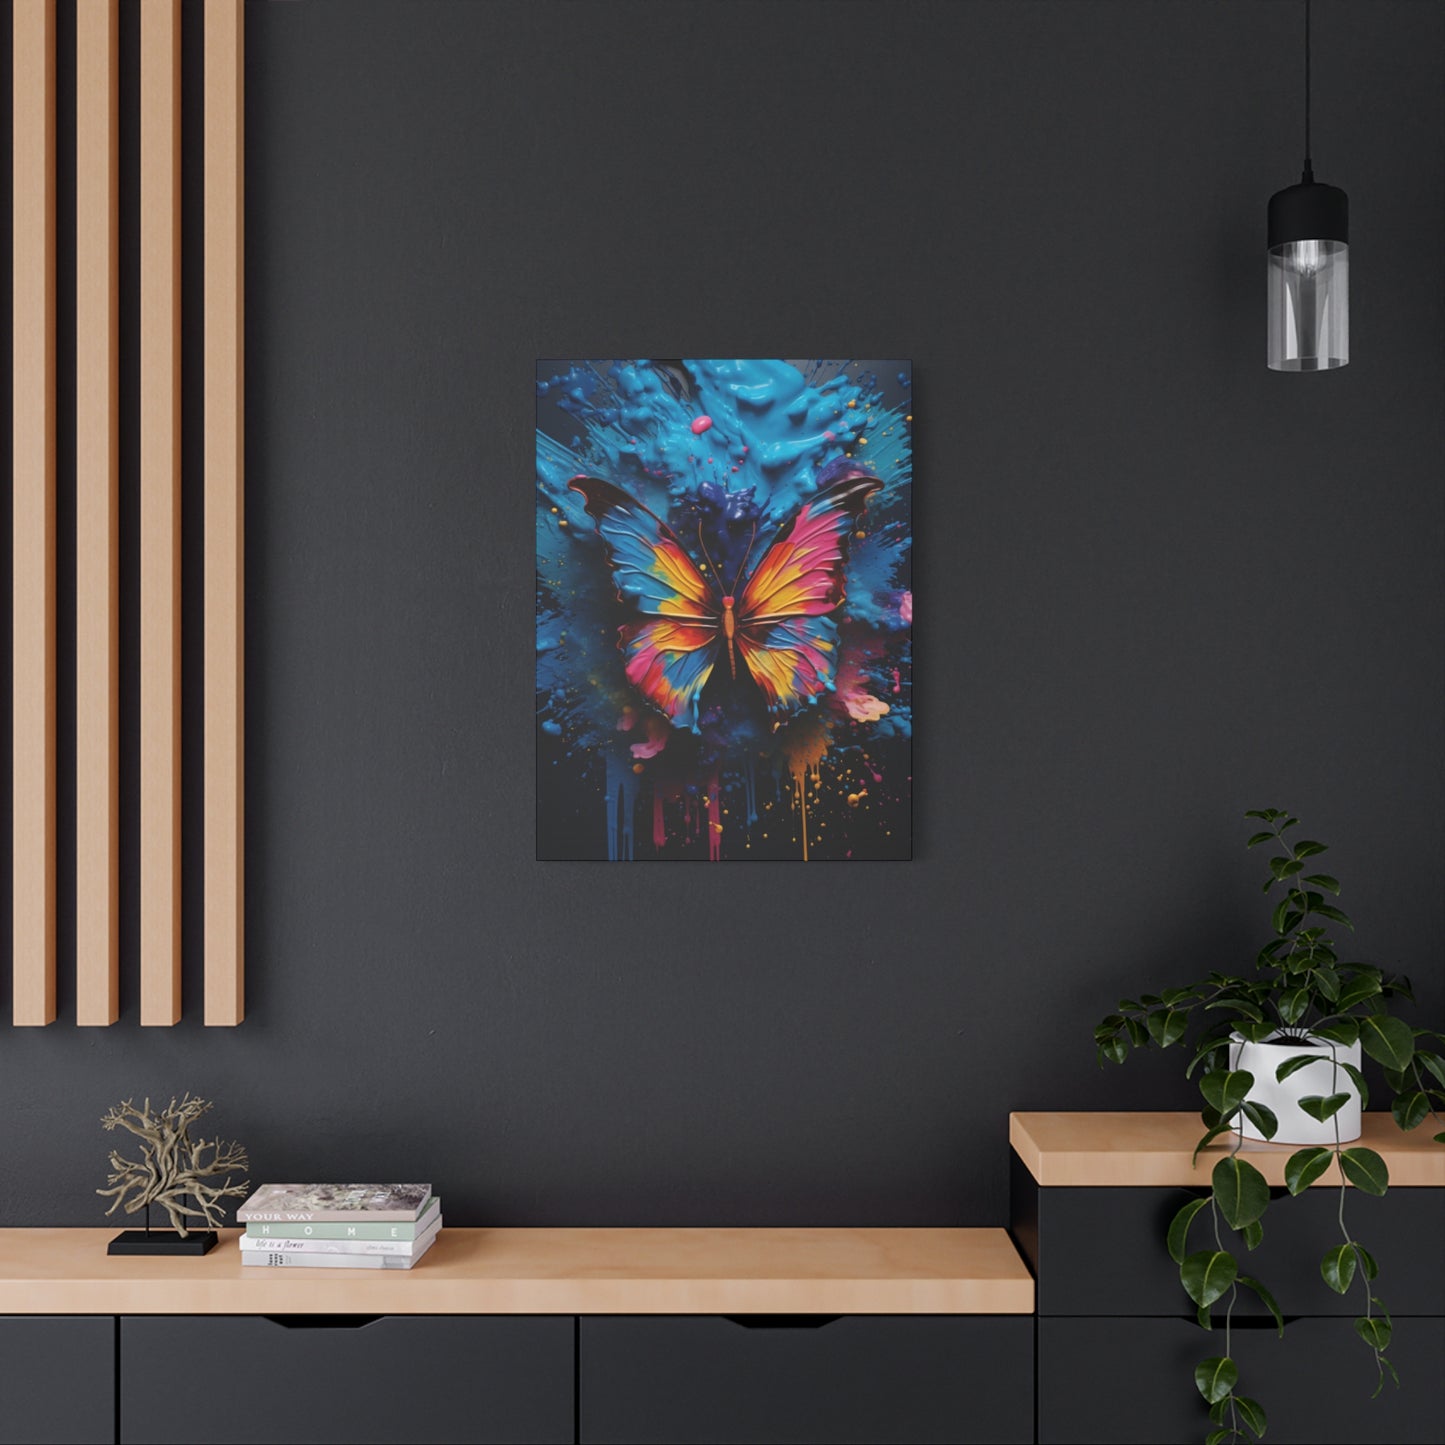 Colorful Butterfly Canvas Art, Butterfly Wall Art, Animal Canvas, Room Wall Decor, Home Gift Matte Canvas